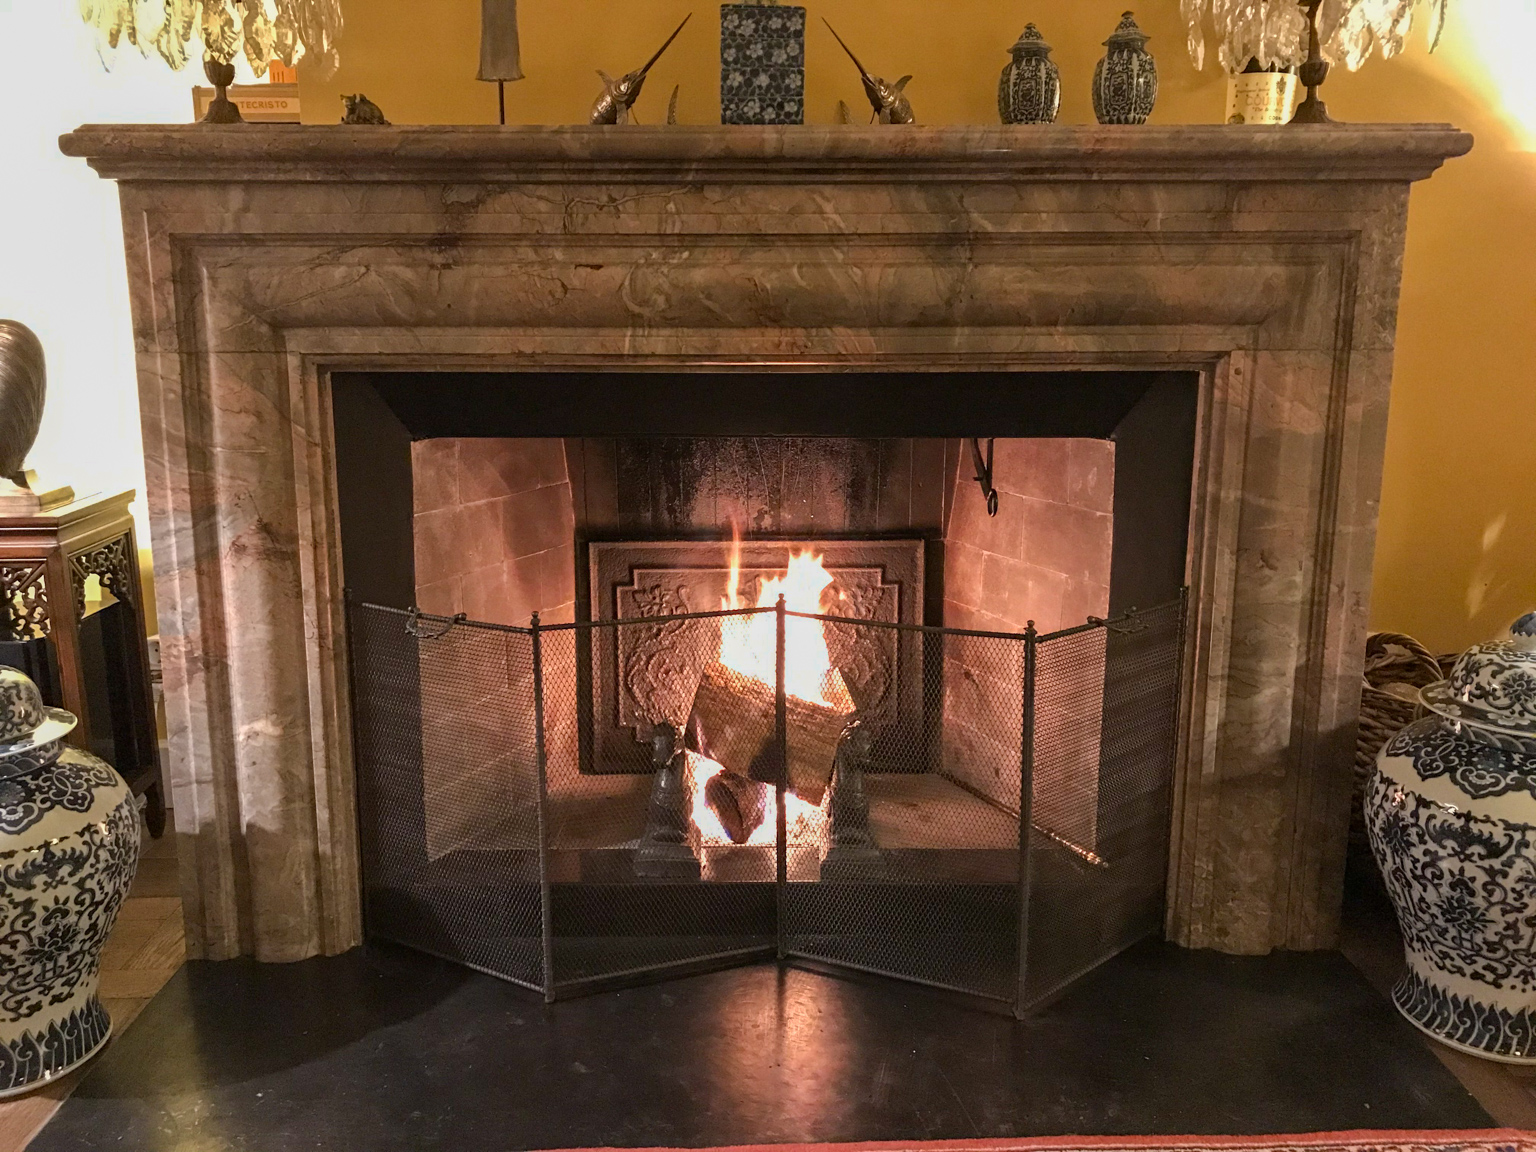 New, handmade French 4-panel fireplace screen (50 cm high) in antique fireplace with antique fireback and antique andirons